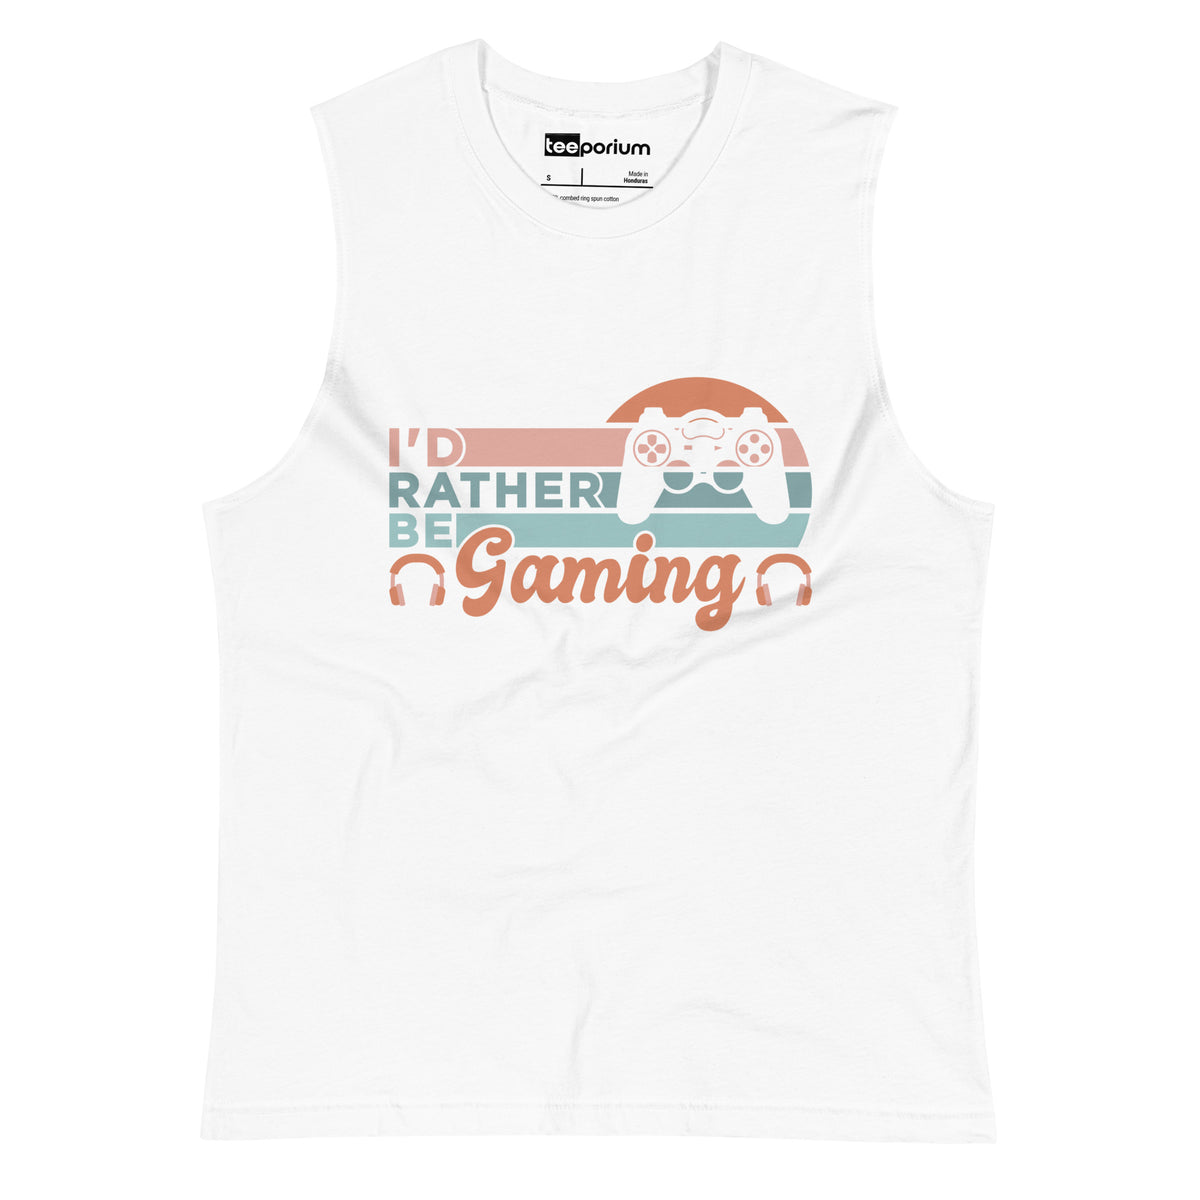 I'd Rather Be Gaming l Muscle Tank